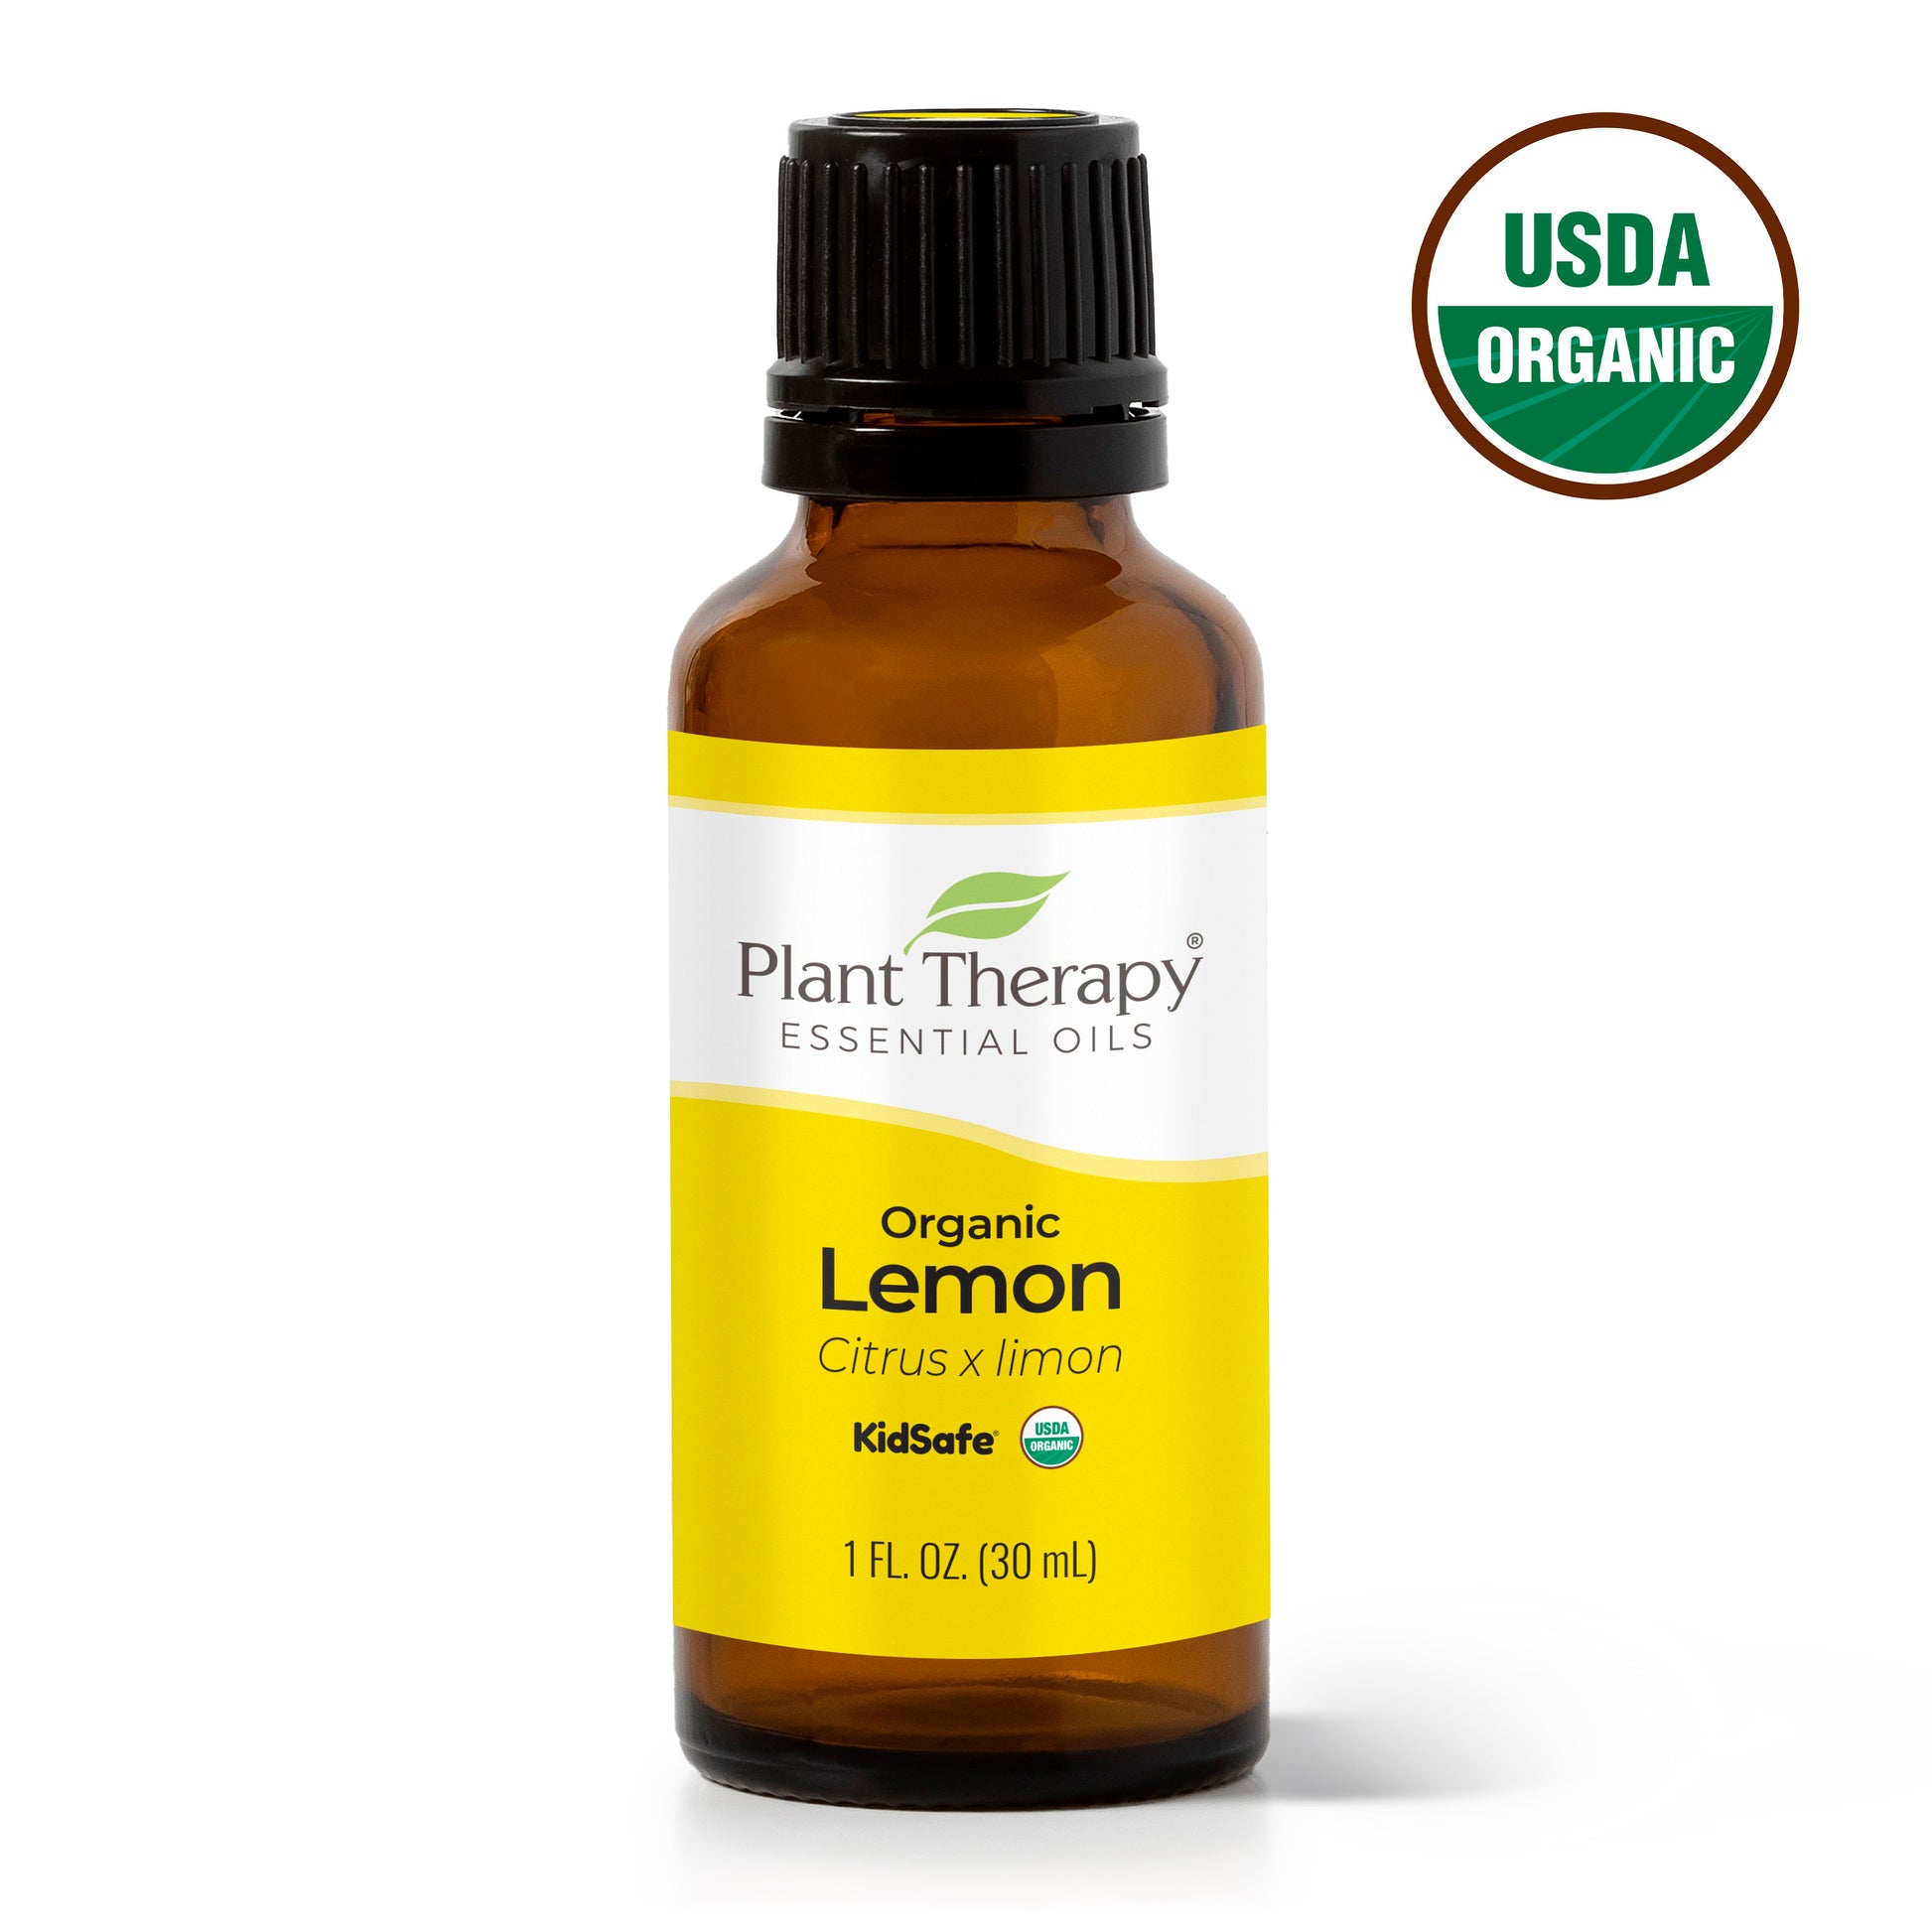 Plant Therapy Lemon Essential Oil 100 ml (3.3 oz) 100% Pure, Undiluted, Natural